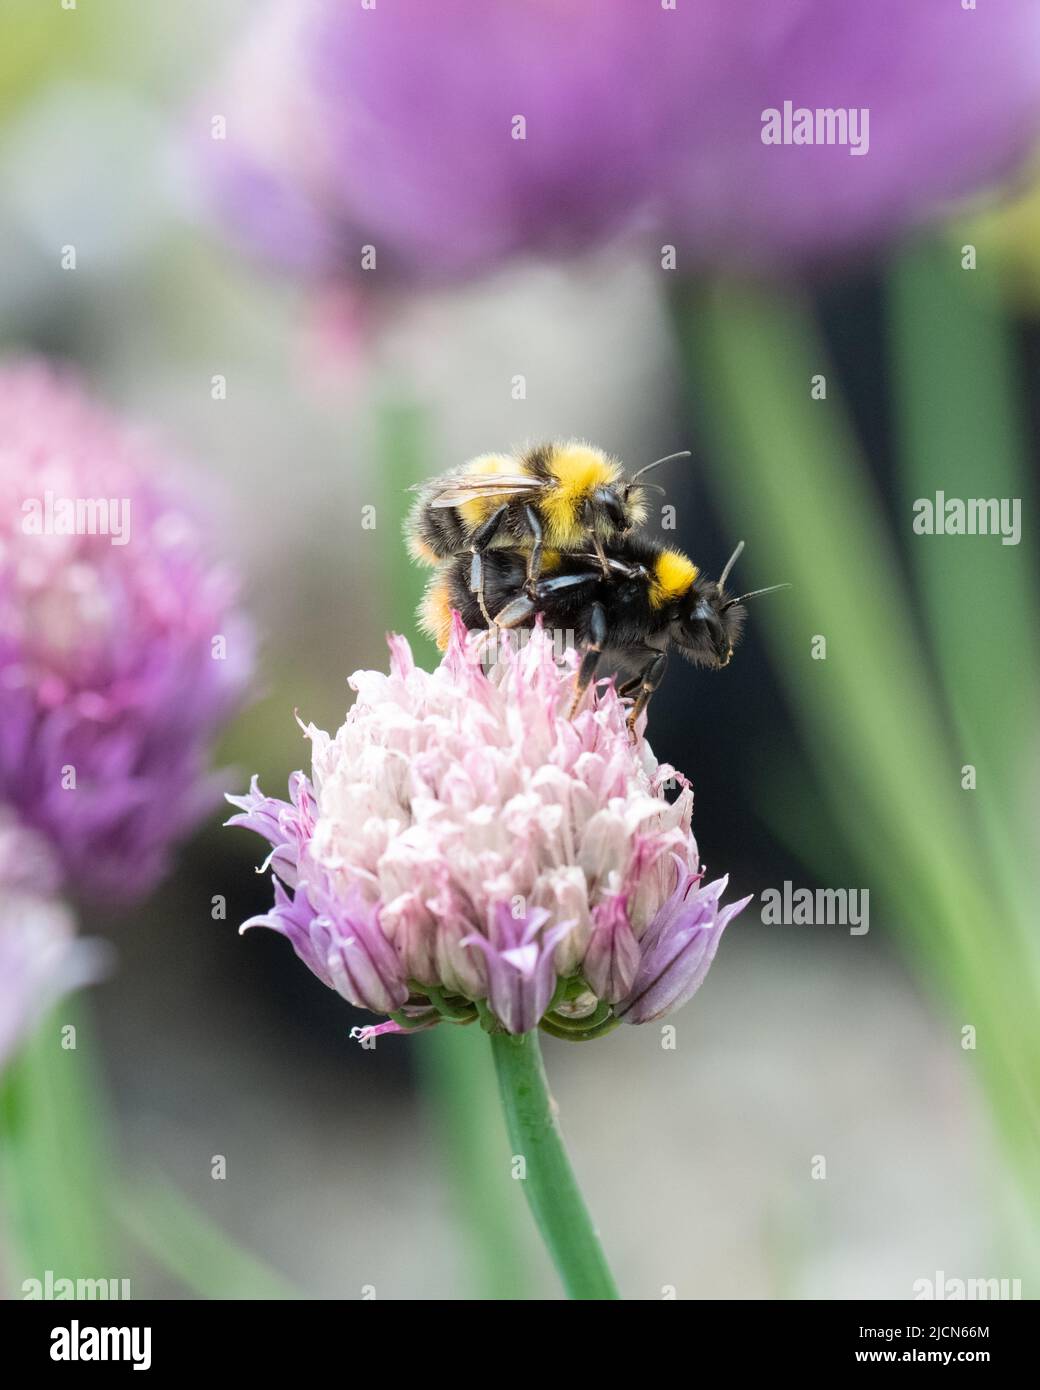 Bumblebees mating - bombus partorum (early bumblebees) mating on chive flower - UK Stock Photo